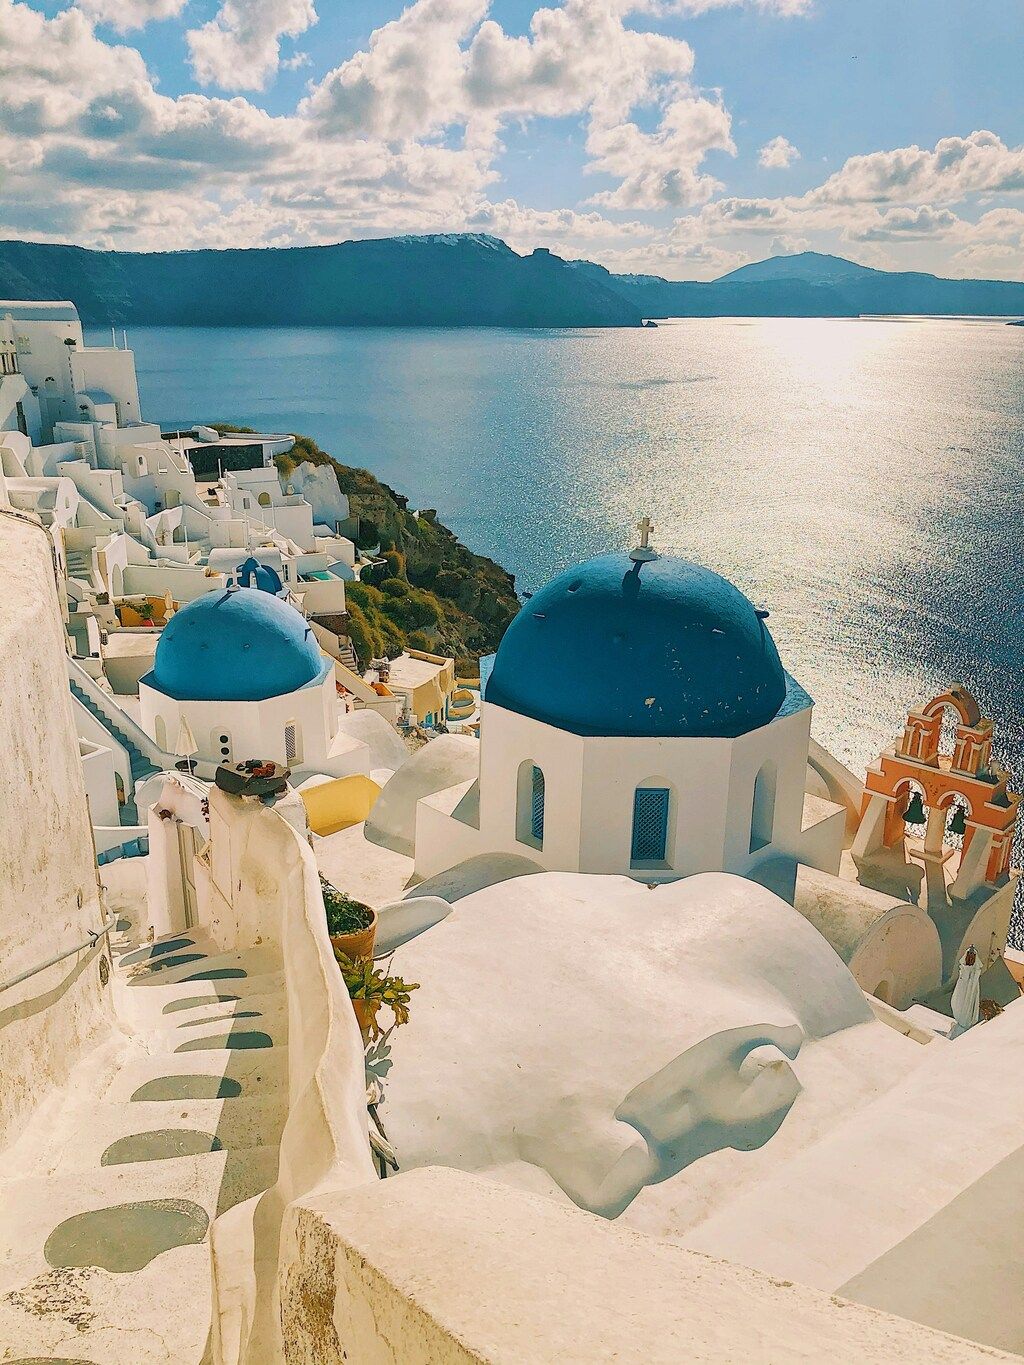 The iconic whitewashed buildings with blue domes of Santorini, set against the backdrop of the sparkling Aegean Sea under a sunny sky